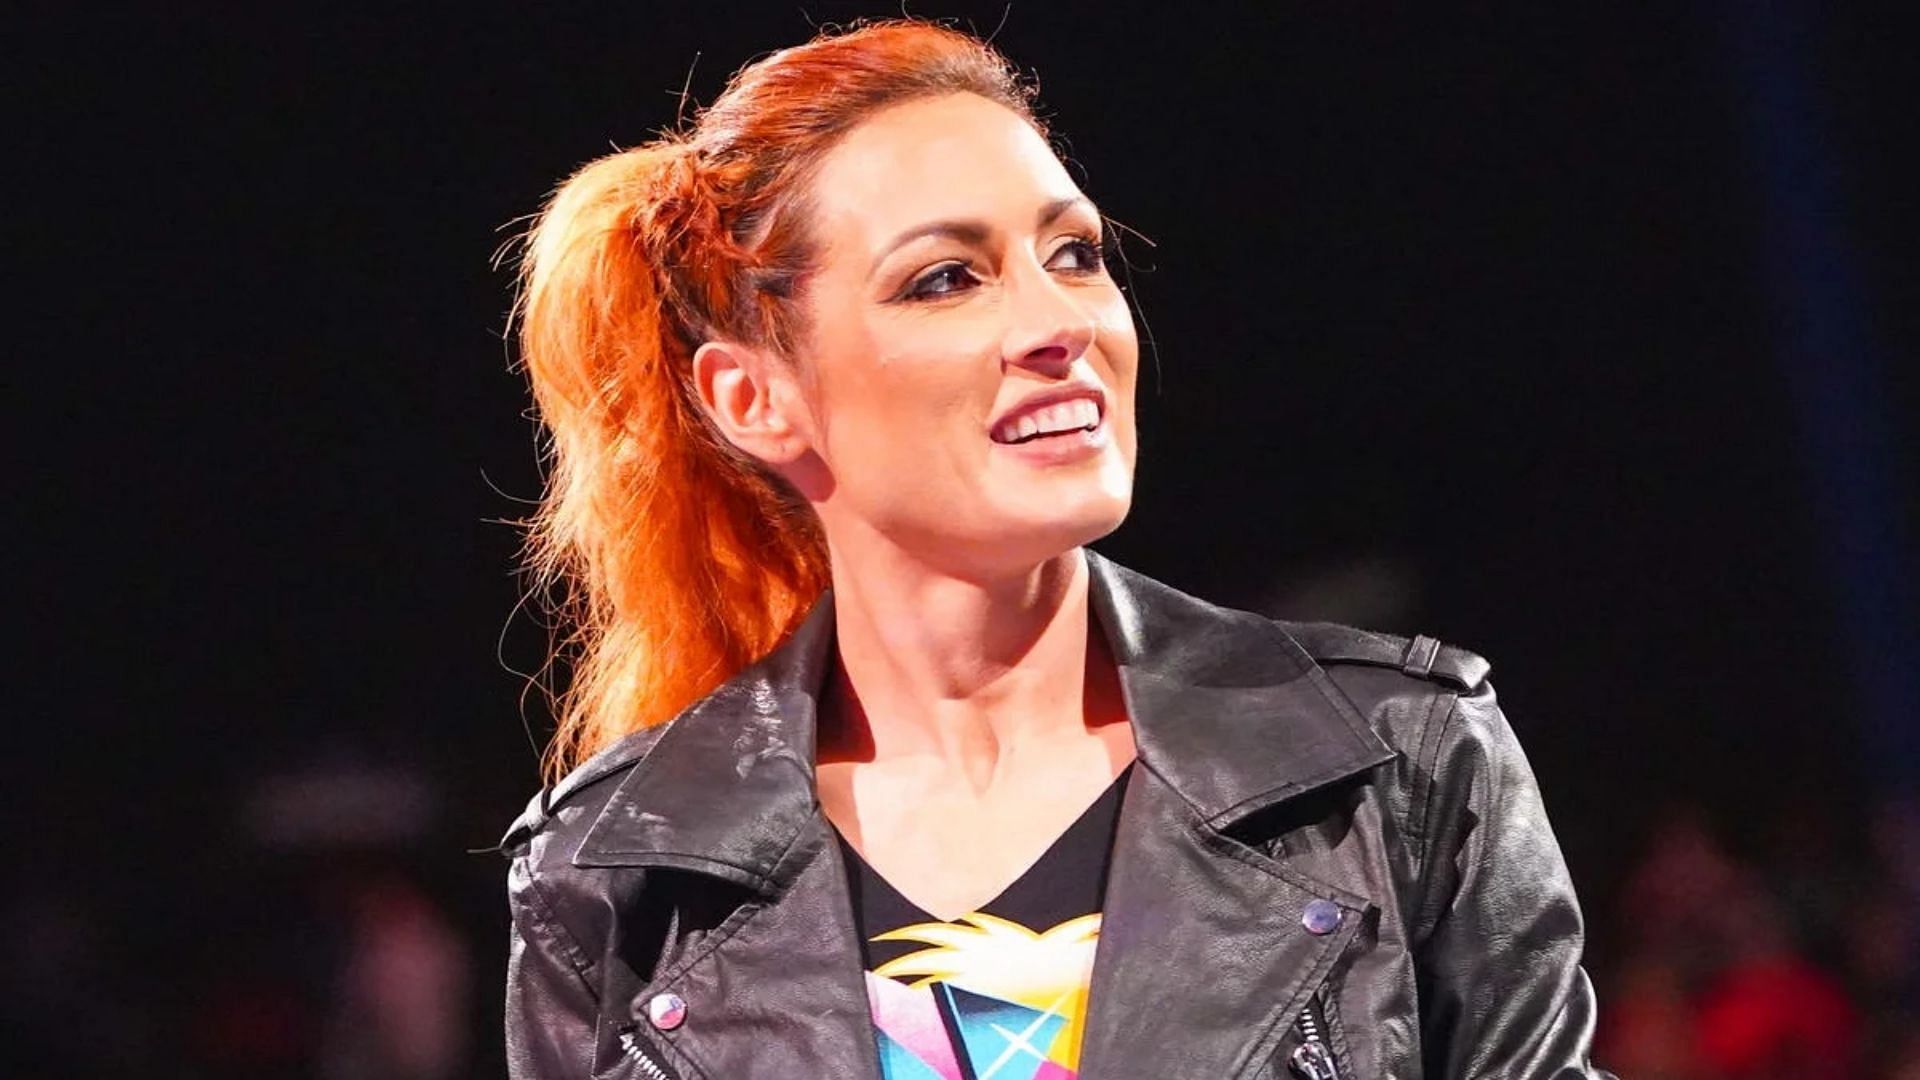 Becky Lynch recently made her return to WWE.